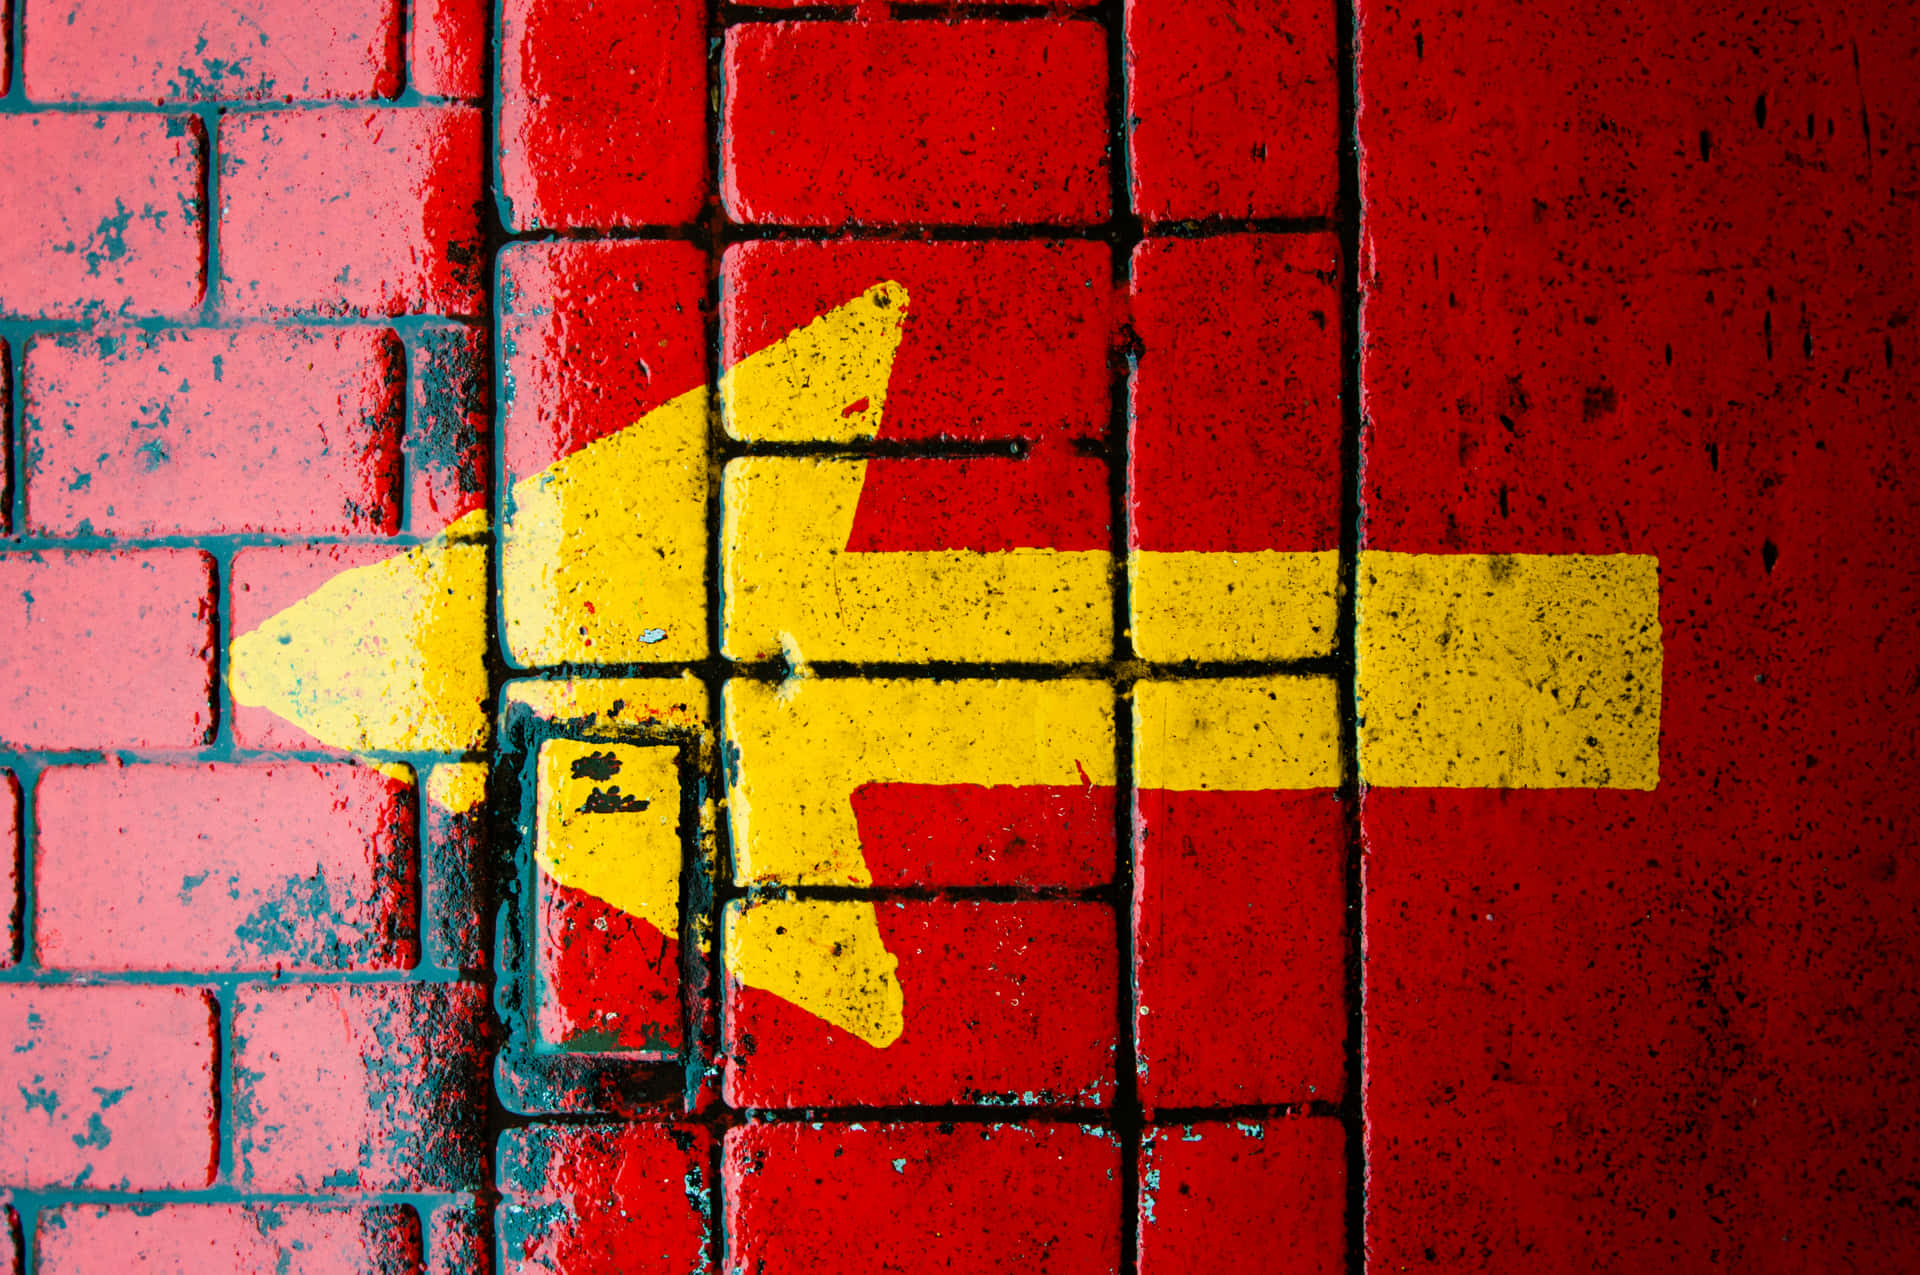 A Yellow Arrow On A Red Brick Wall